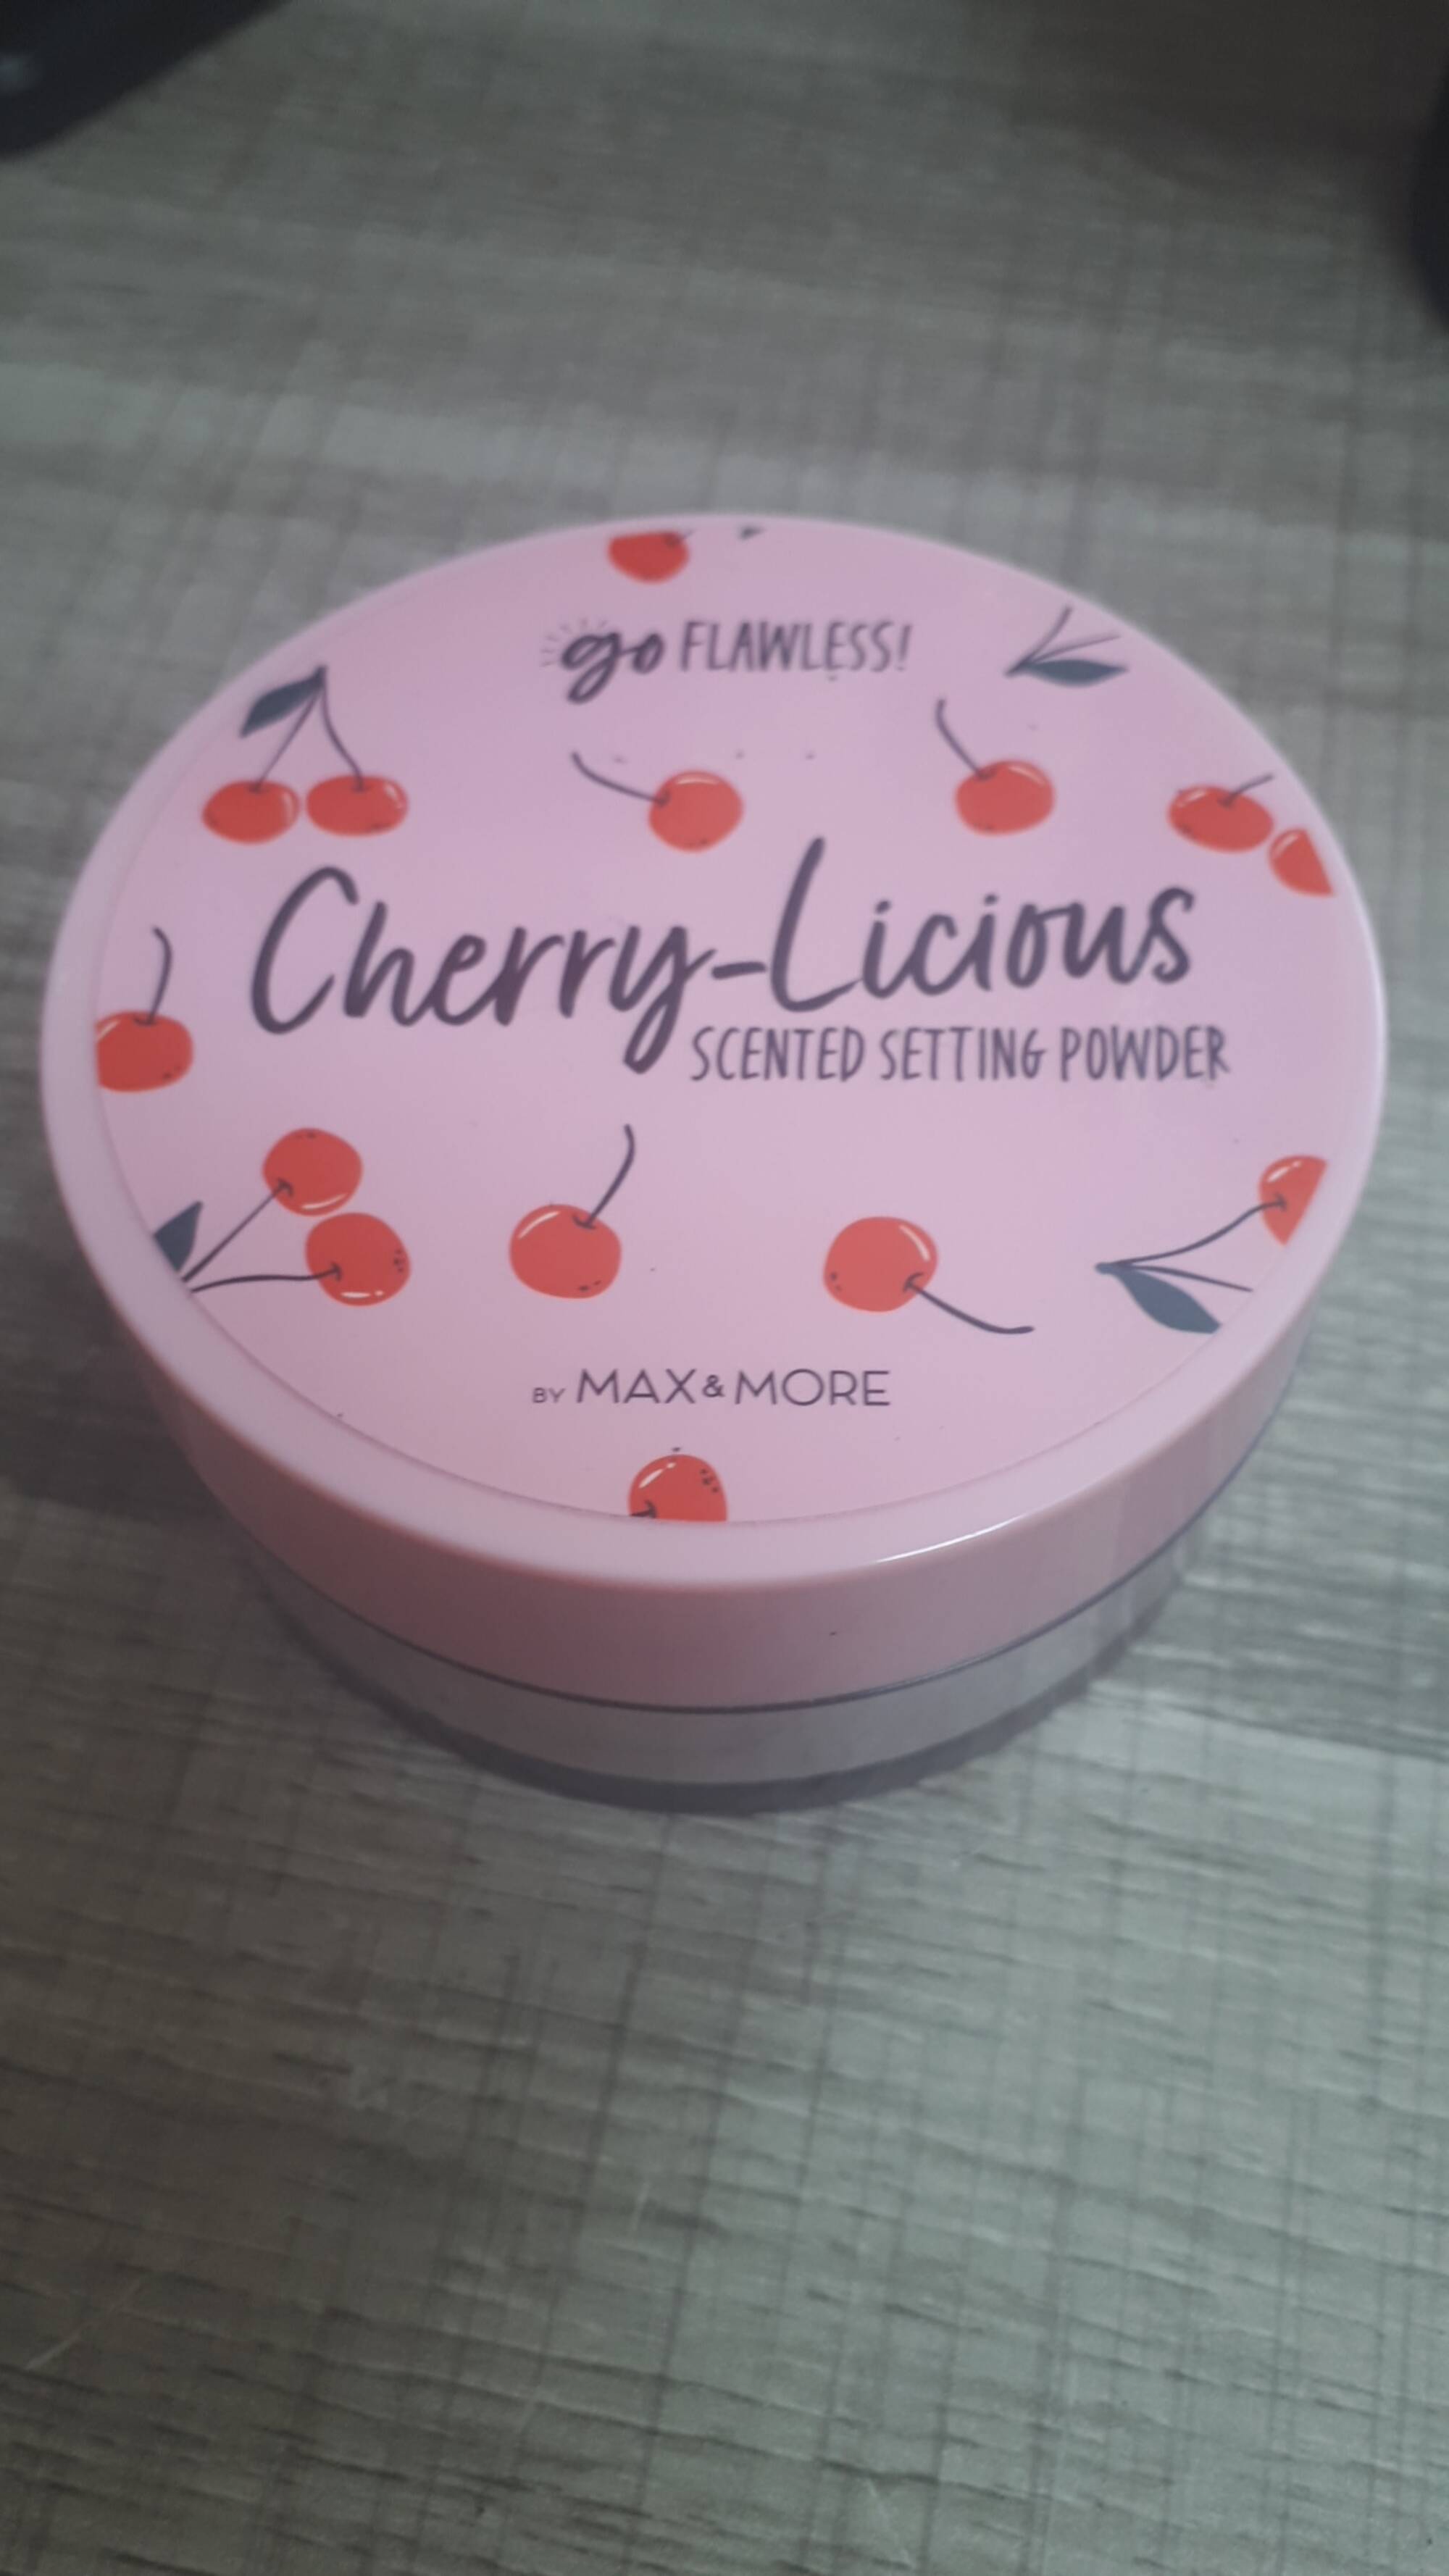 MAX & MORE - Cherry-licious - Scented setting powder